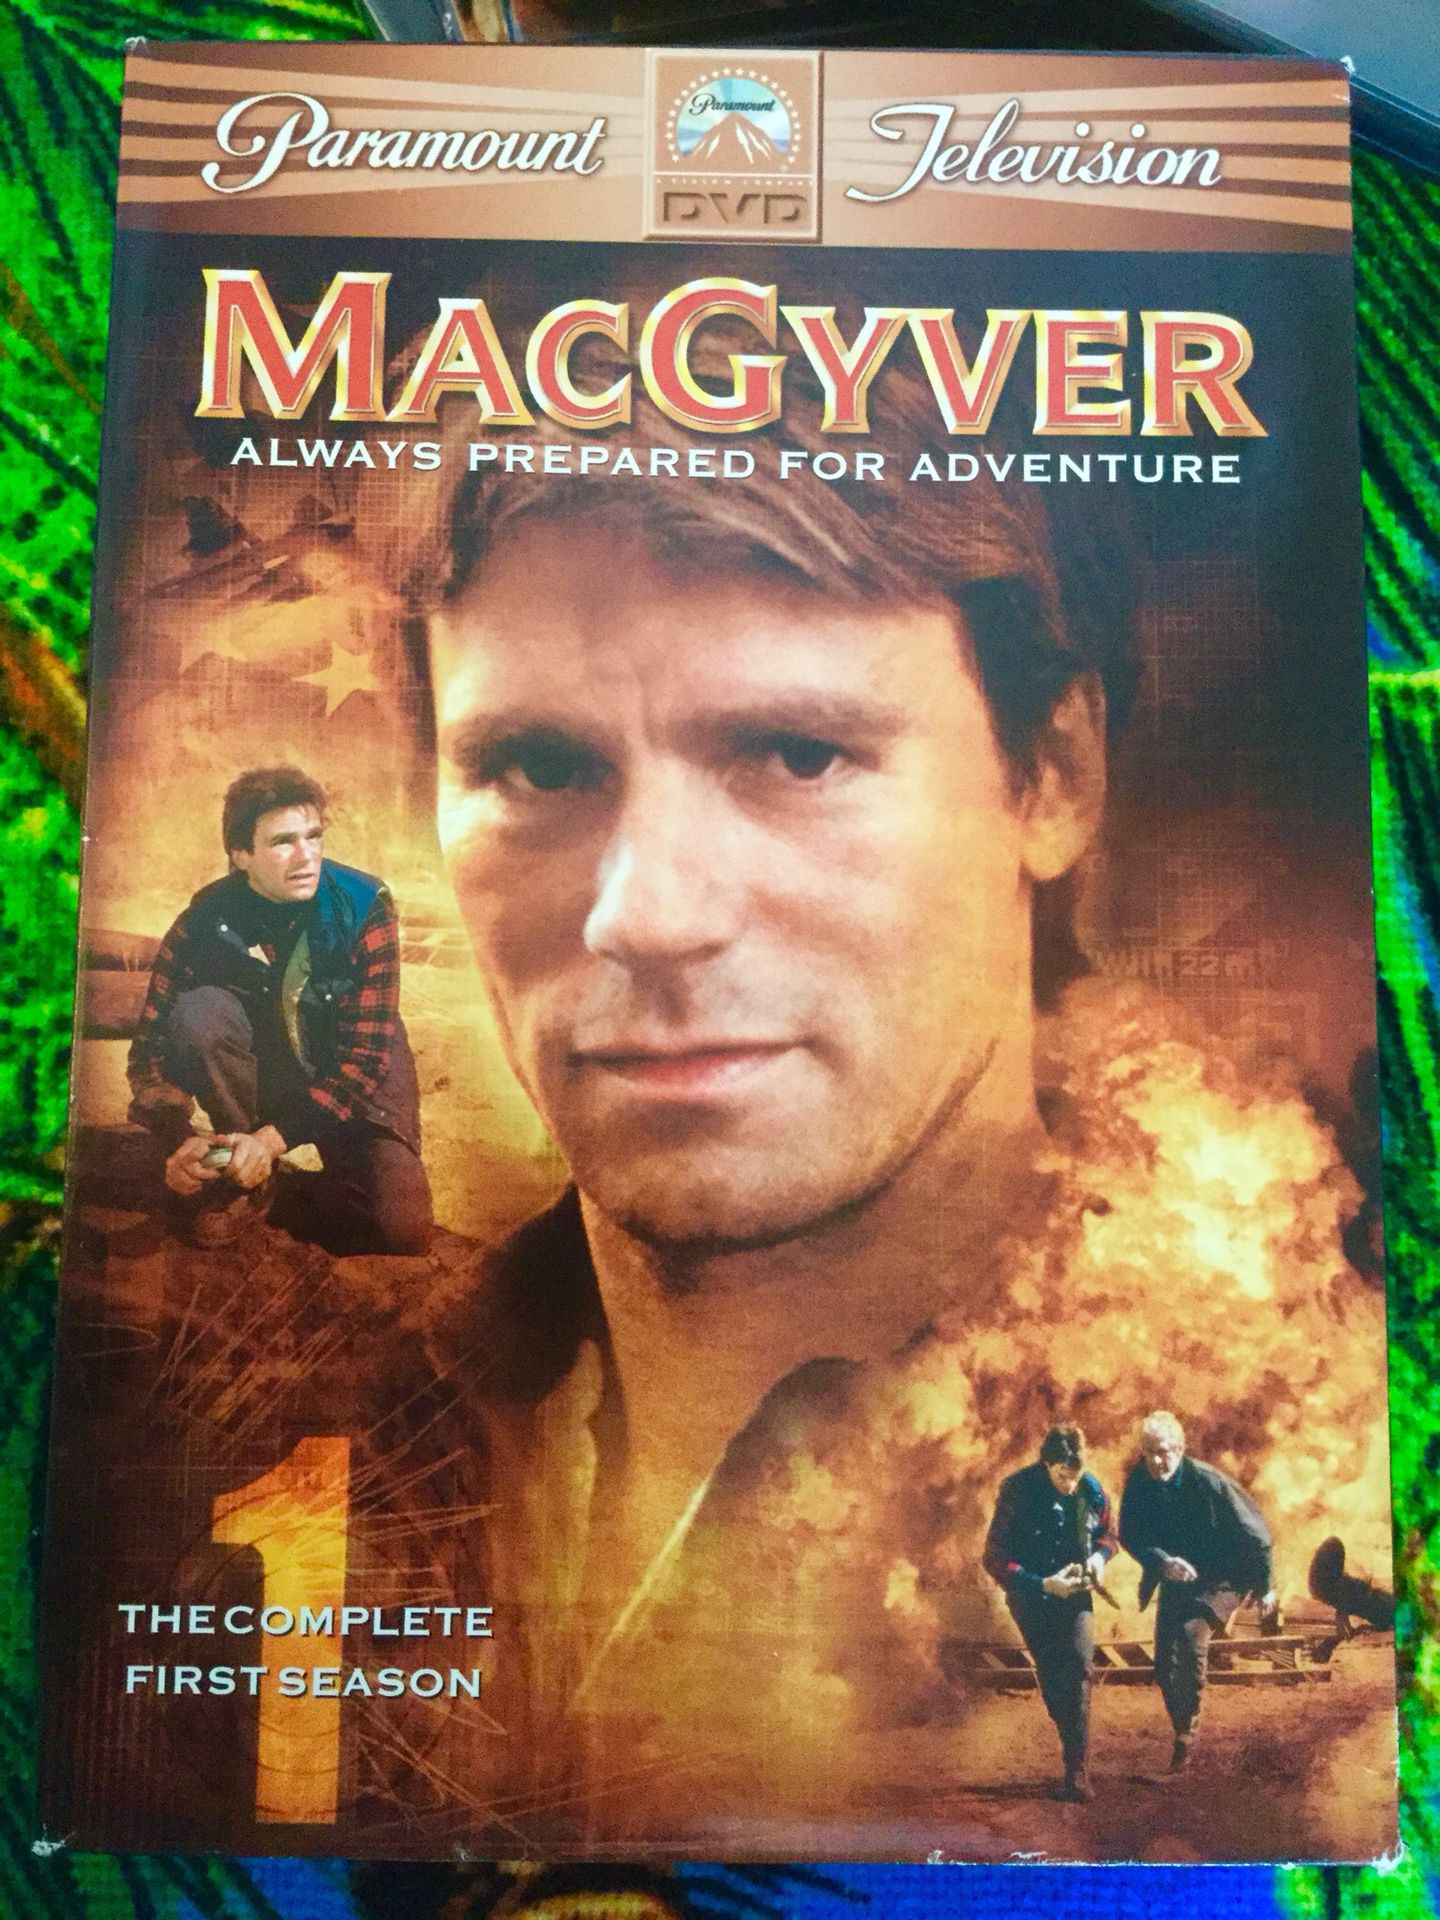 The Complete 1 st Season 6 DVD disc Movies / MacGyver 😎👍 Ready for Adventure of Mac Gyver